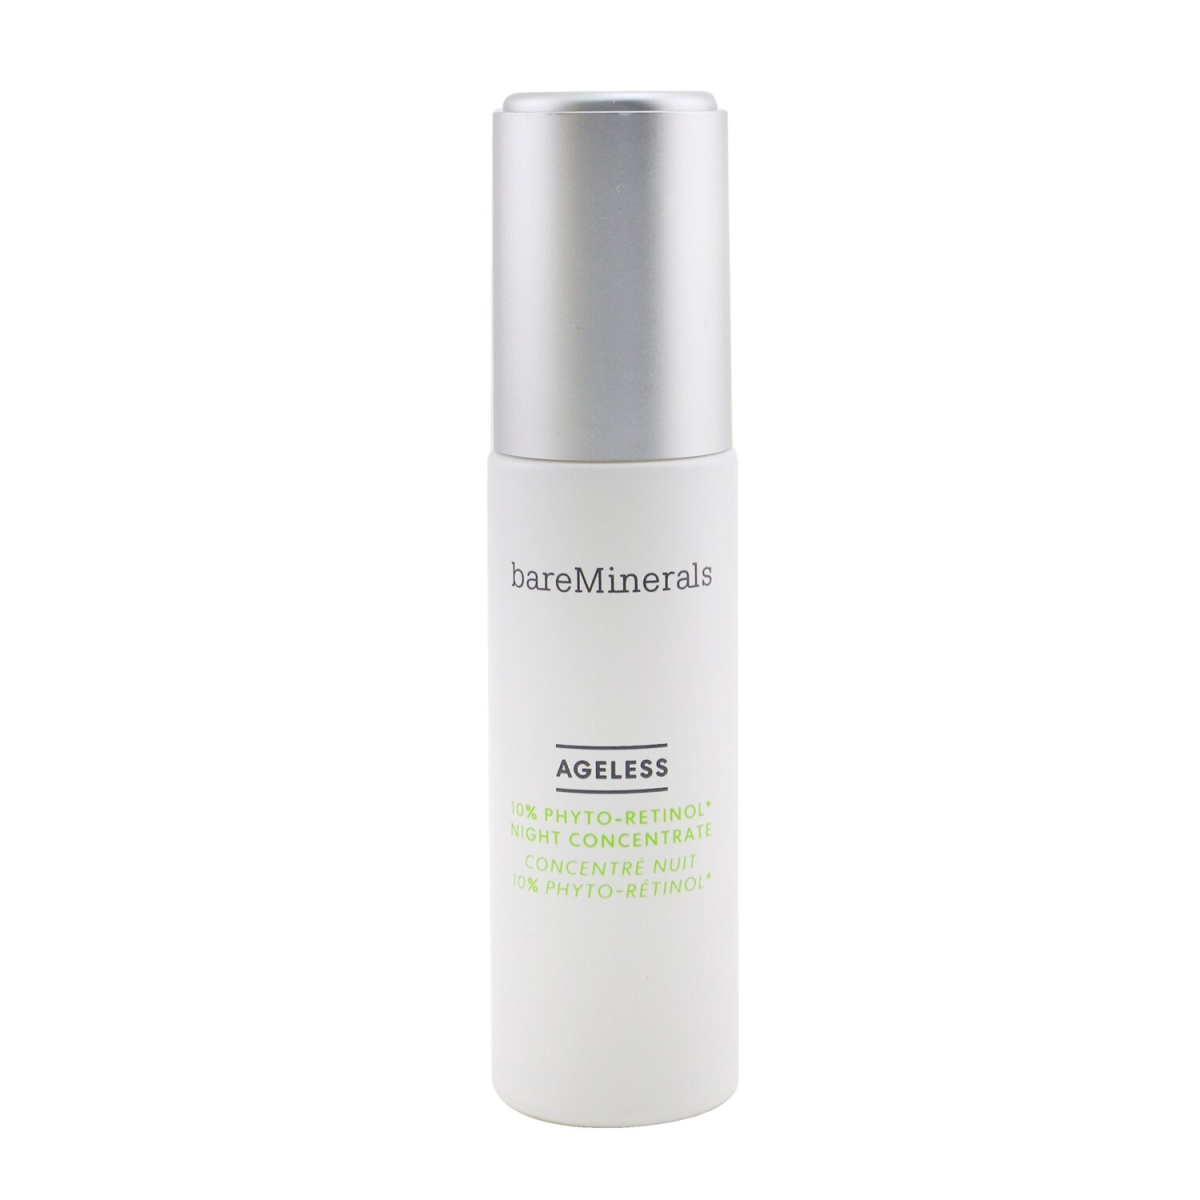 Picture of BareMinerals 263150 1 oz Ageless 10 Percent Phyto-Retinol Night Concentrate